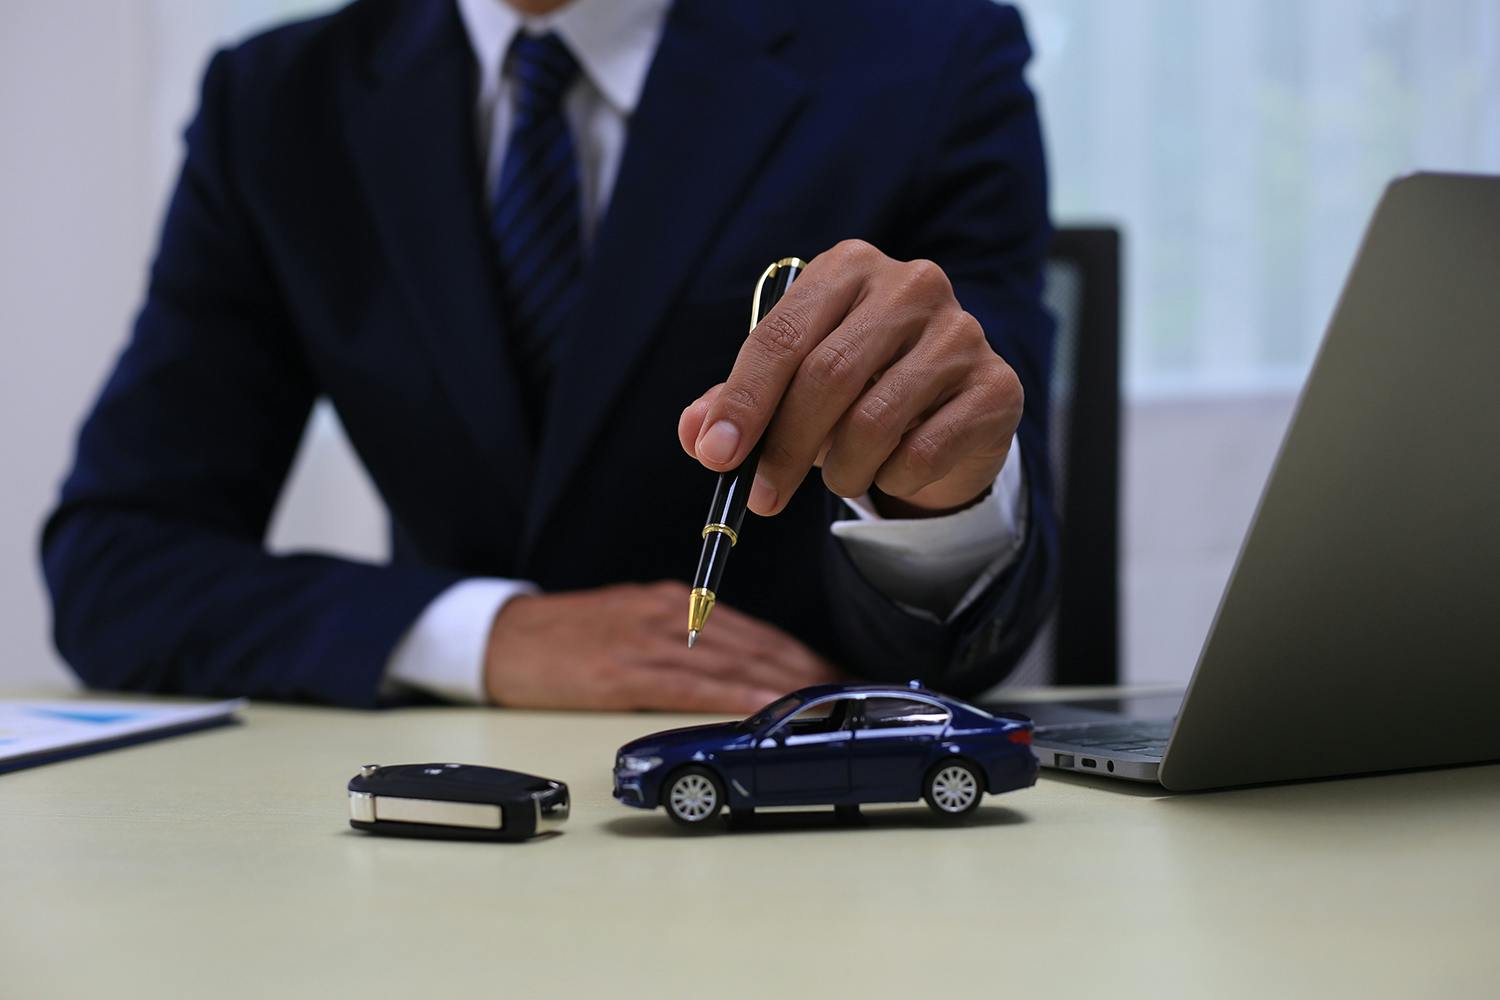 man in suit at desk holding pen over toy car and keys